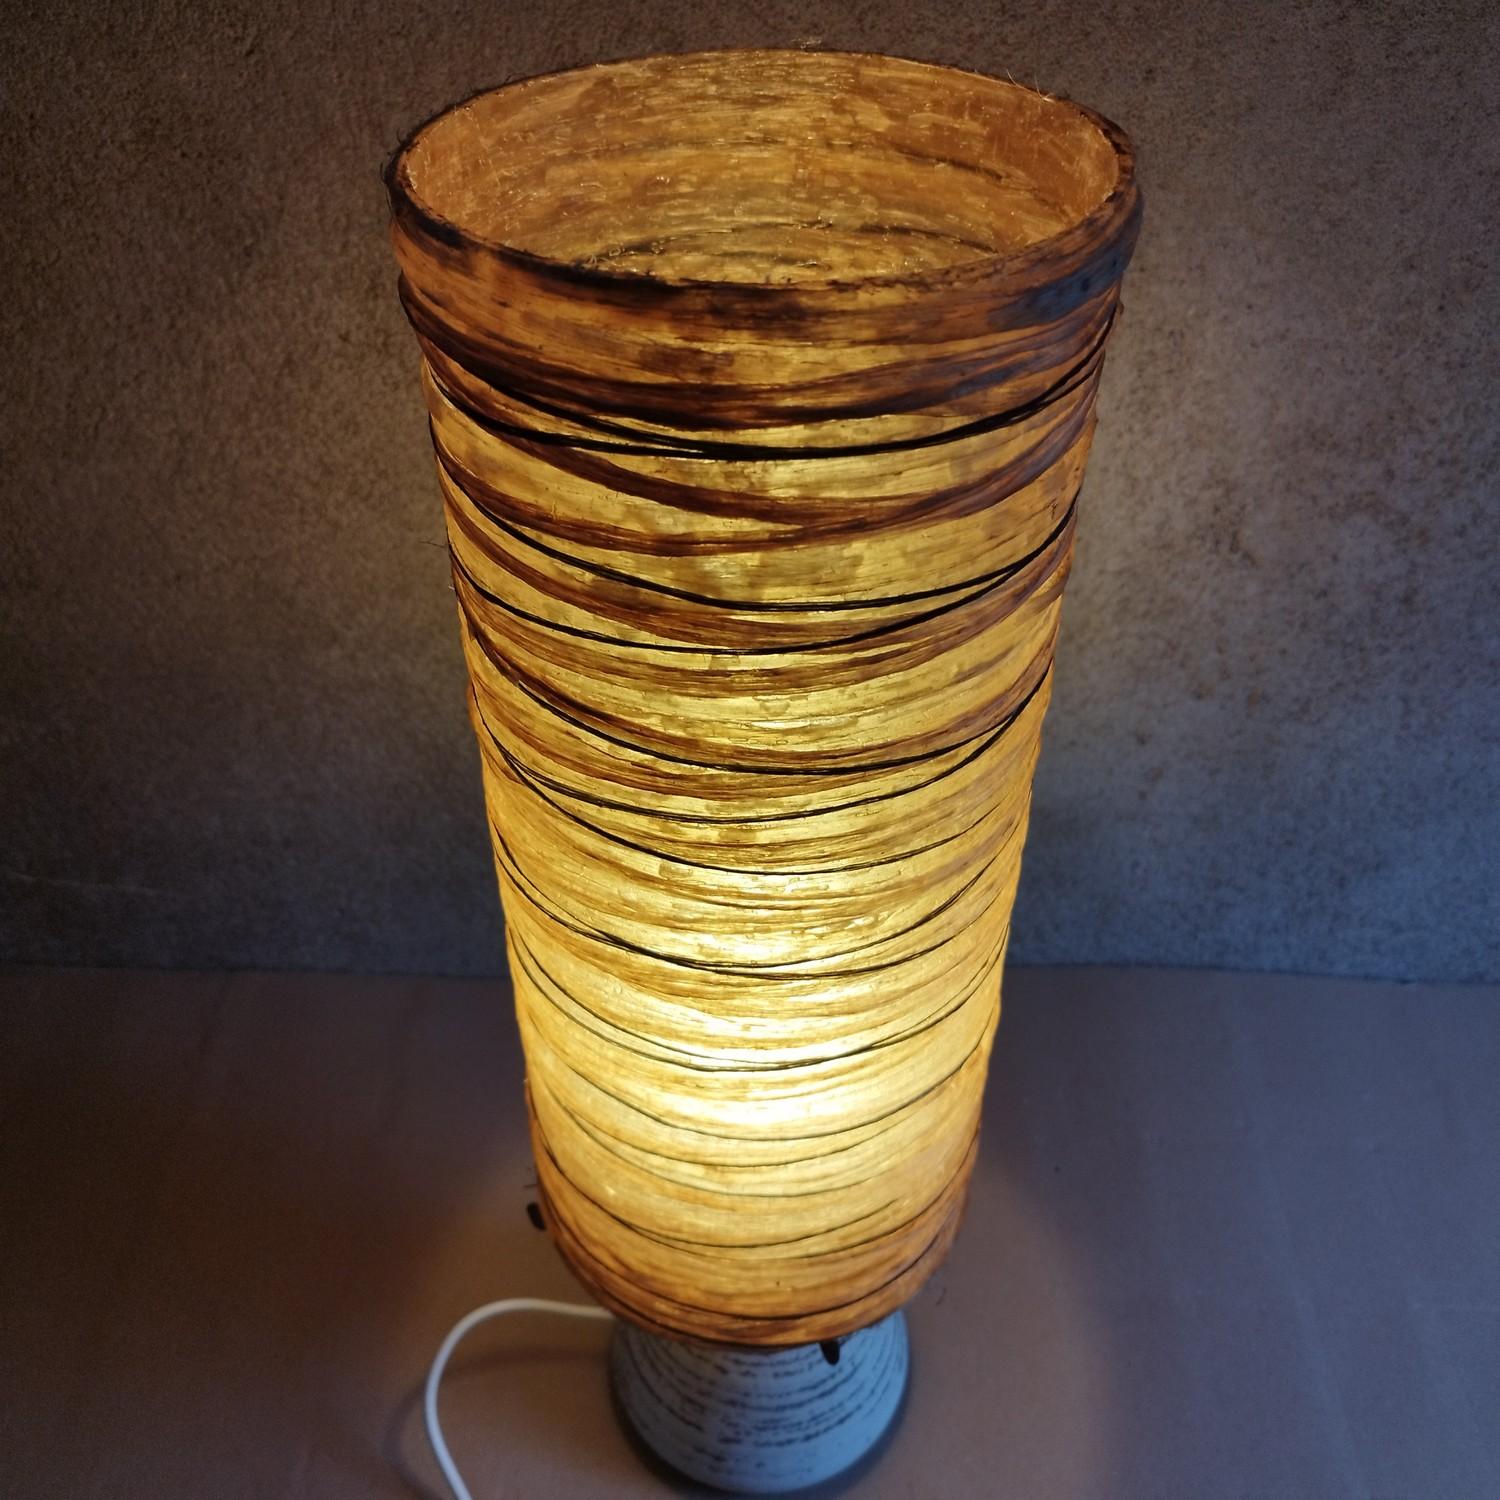 Charming little table lamp in ceramic with its resin lamp shade, typical of Accolay production in the 70's.
The base measures 17,5cm high, the shade is 39,5cm high, and the diameter is 17,5cm.
The electricity has been redone, the socket accepts E27